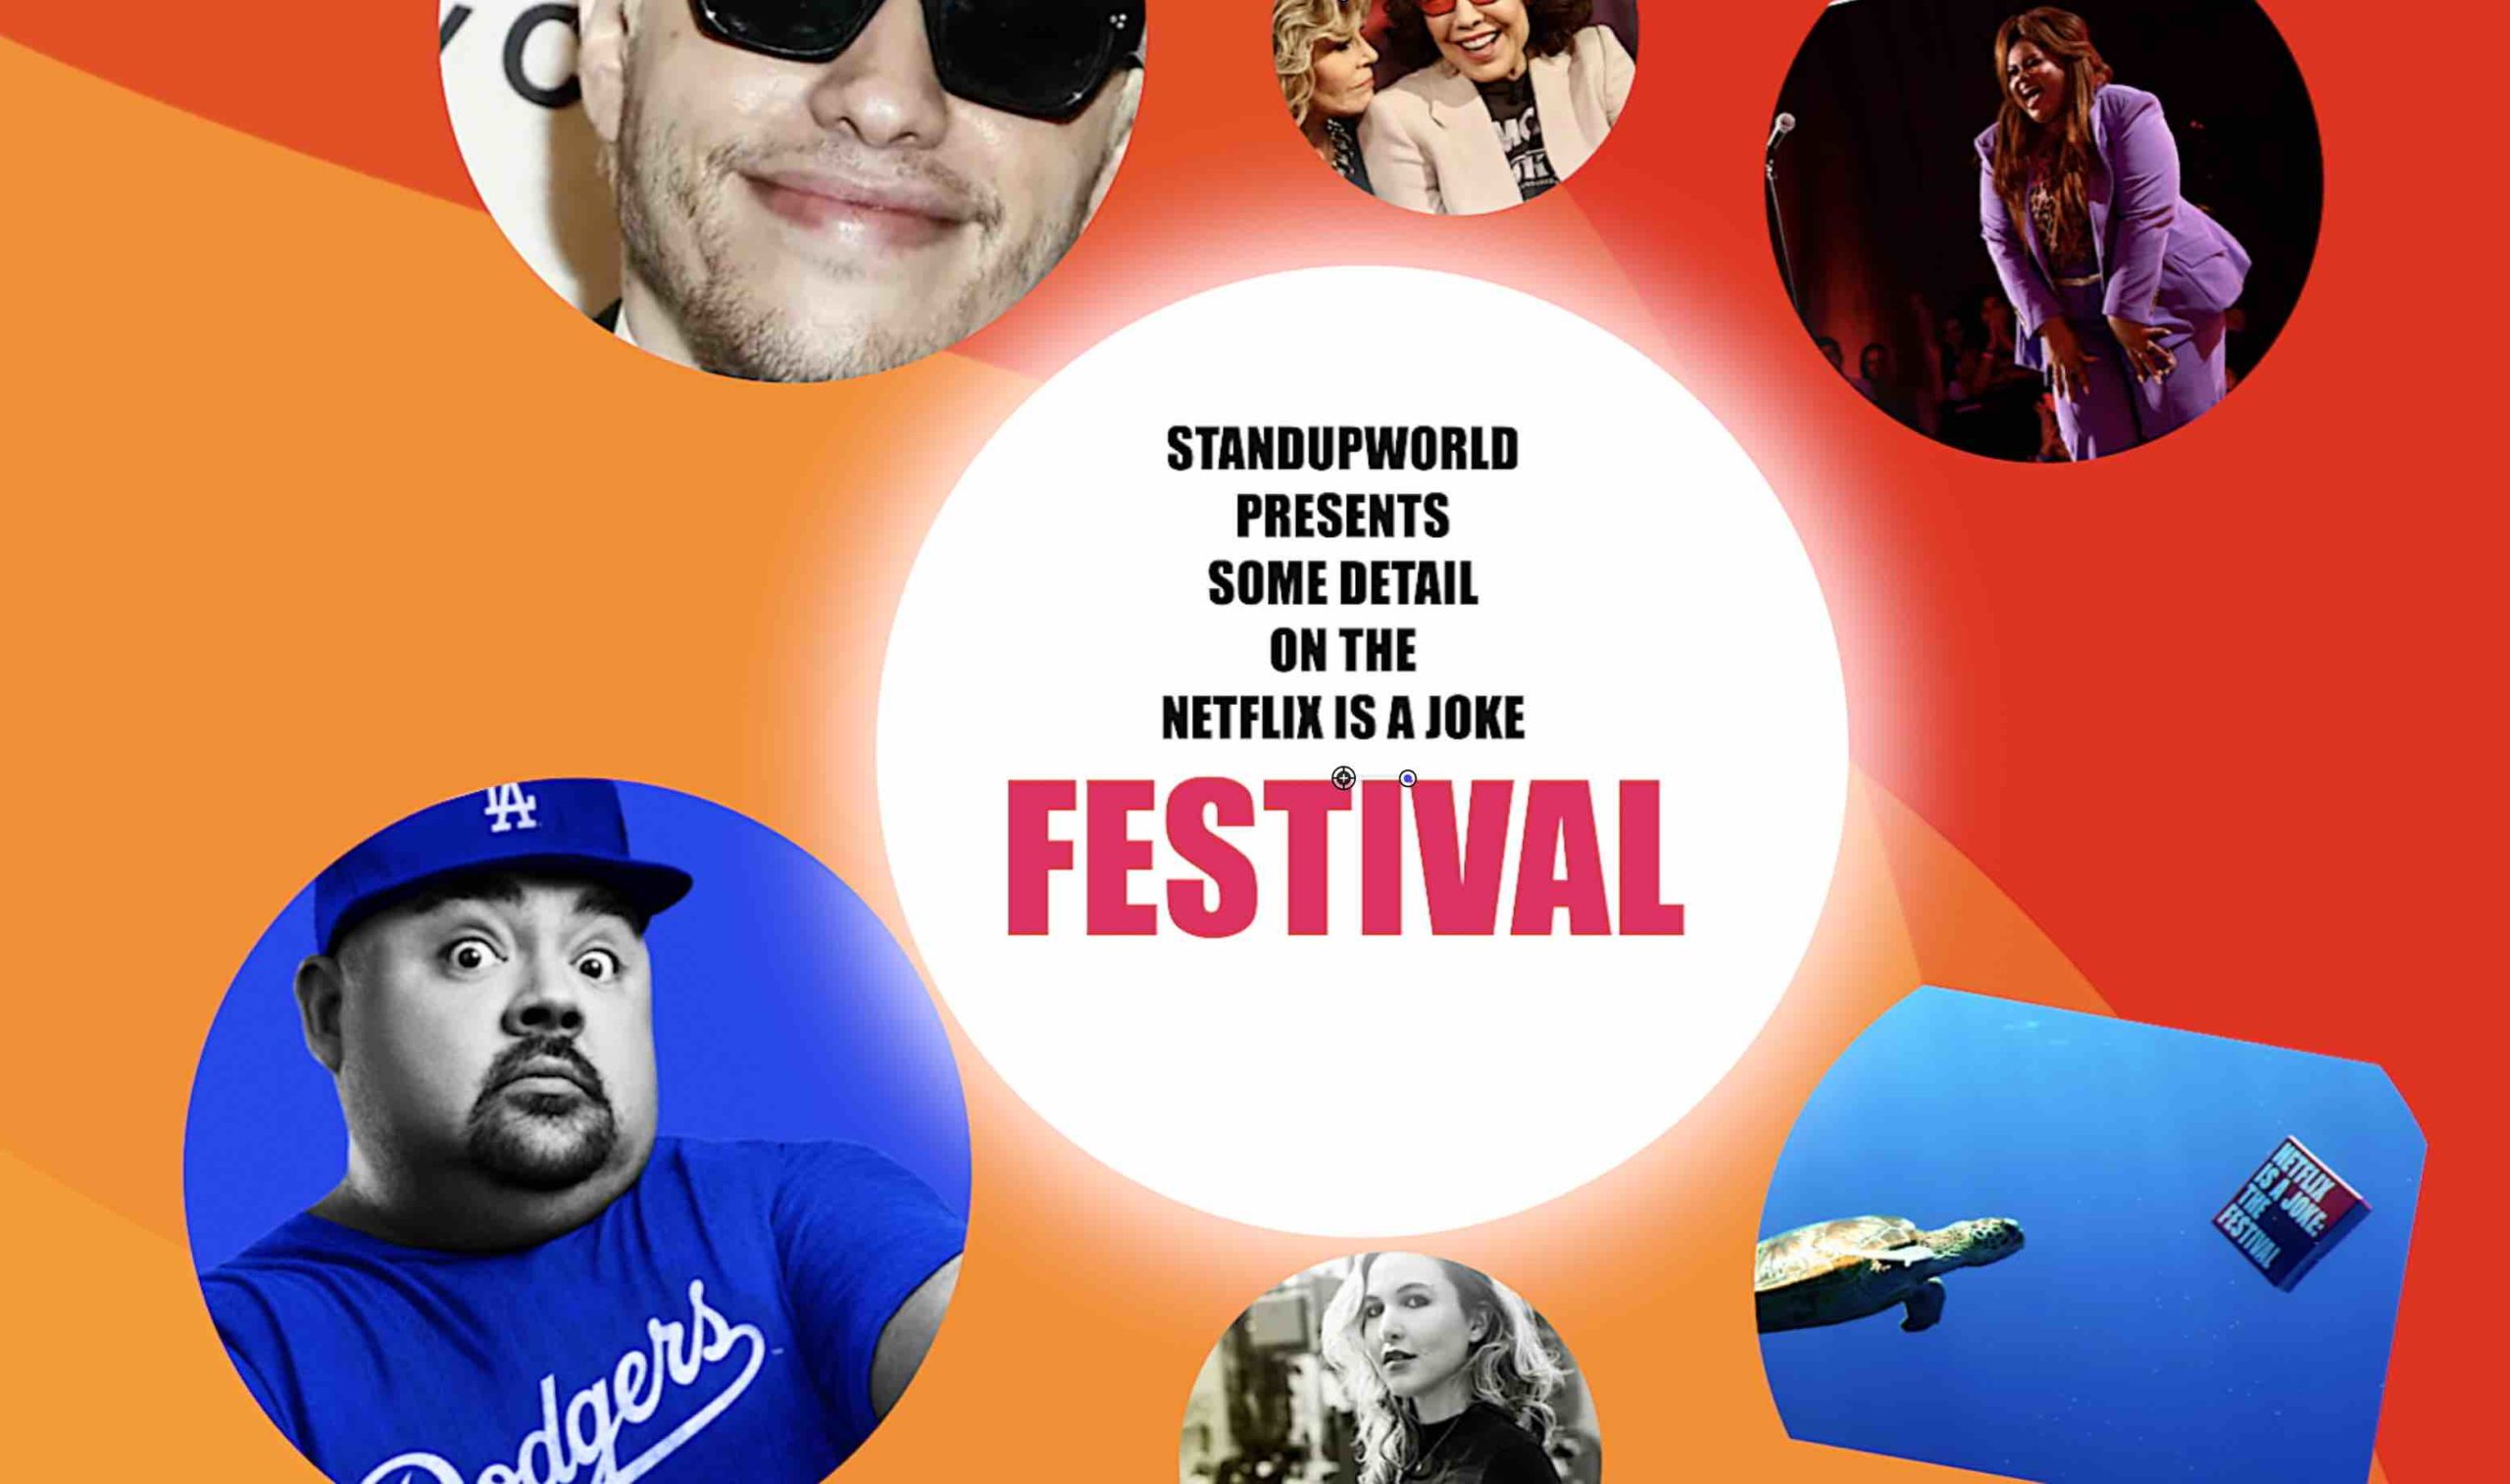 Featured image for “SOME DETAIL ON THE NETFLIX FESTIVAL”